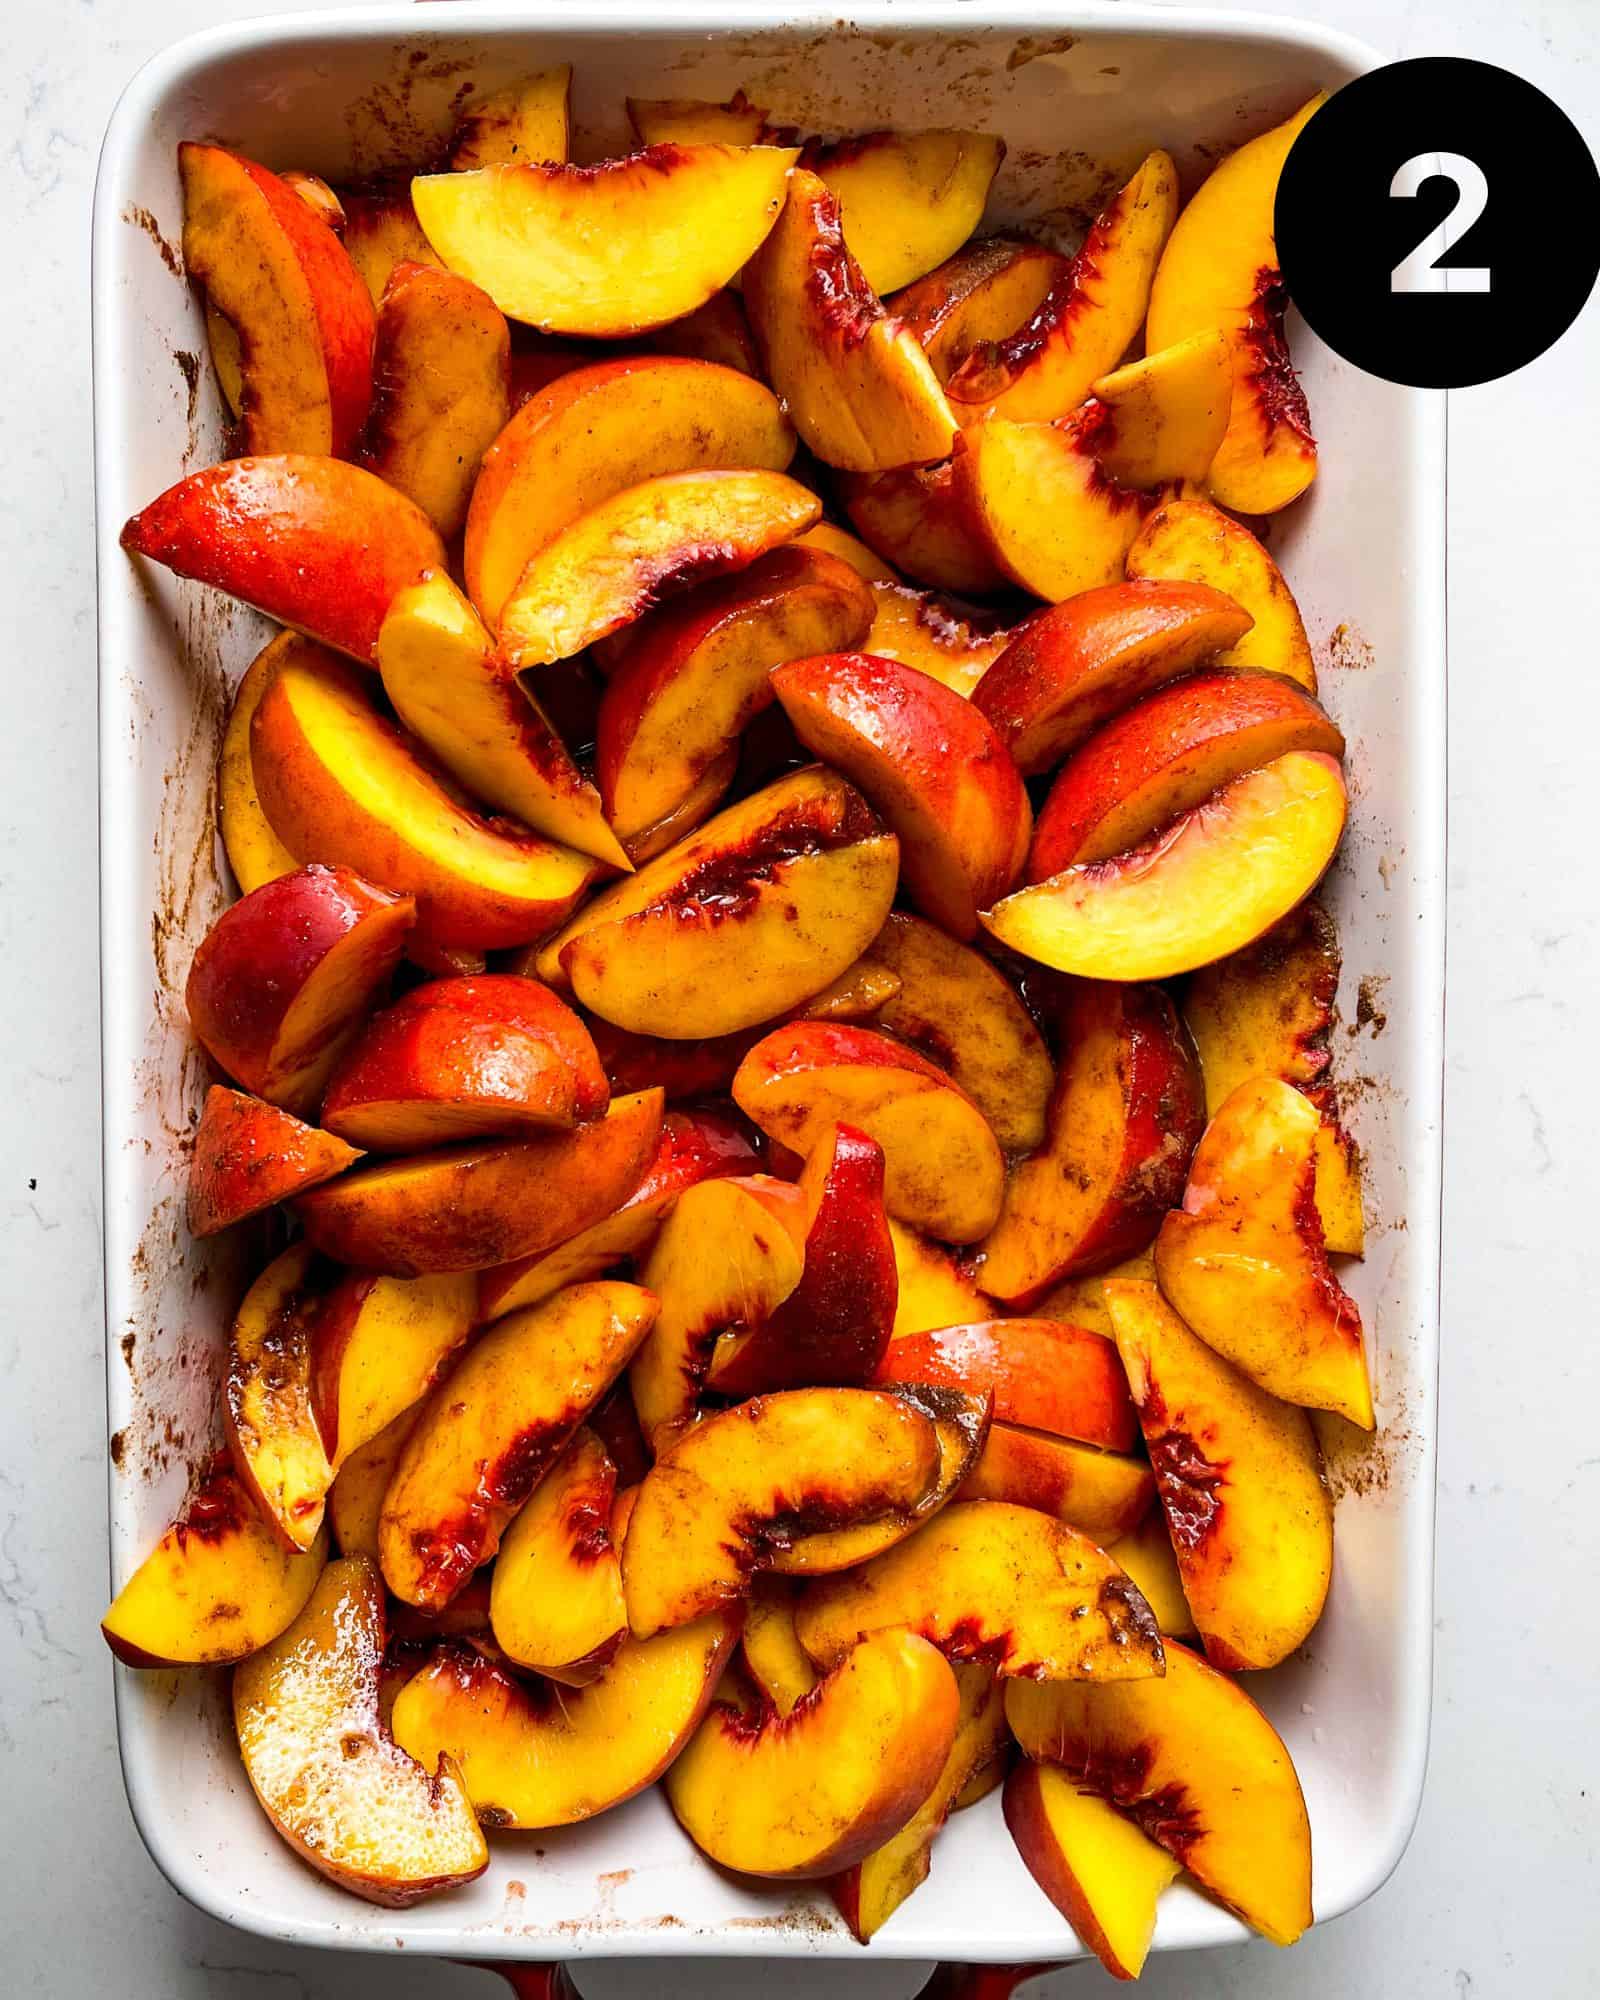 yellow peaches tossed in sugar and spices in a 9x13 baking dish.